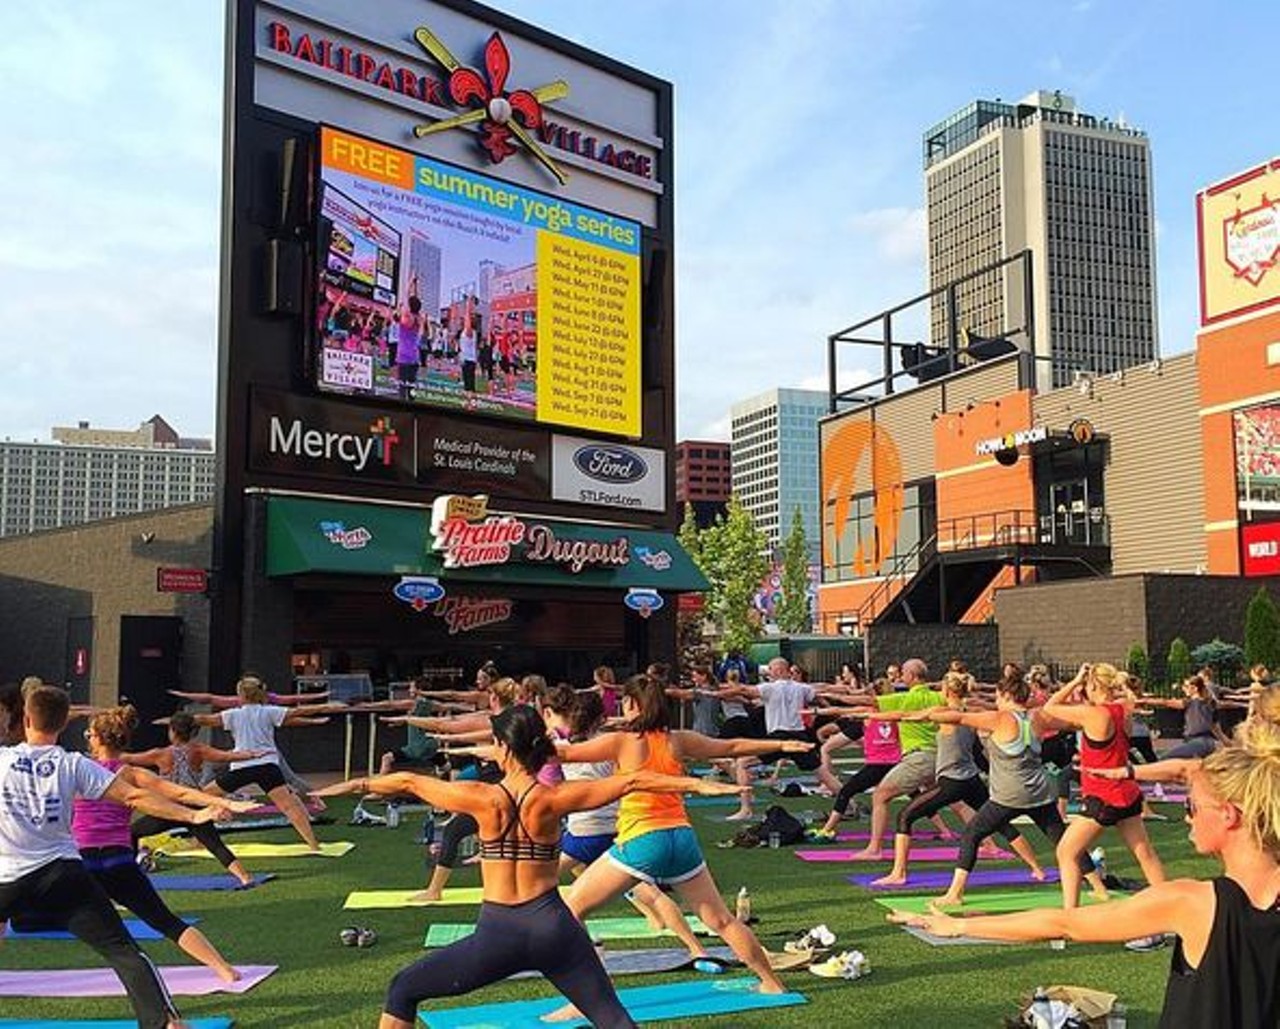 Free Summer Yoga Series at Ballpark Village
601 Clark Ave. 
St Louis, MO
(314) 345-9481
Yoga isn't just for people with money. You can get all the benefits of the practice without any of the price with free yoga at Ballpark Village&#146;s Busch II throughout the summer. Namaste. Photo courtesy of Instagram / bpvstl via pikore.com.